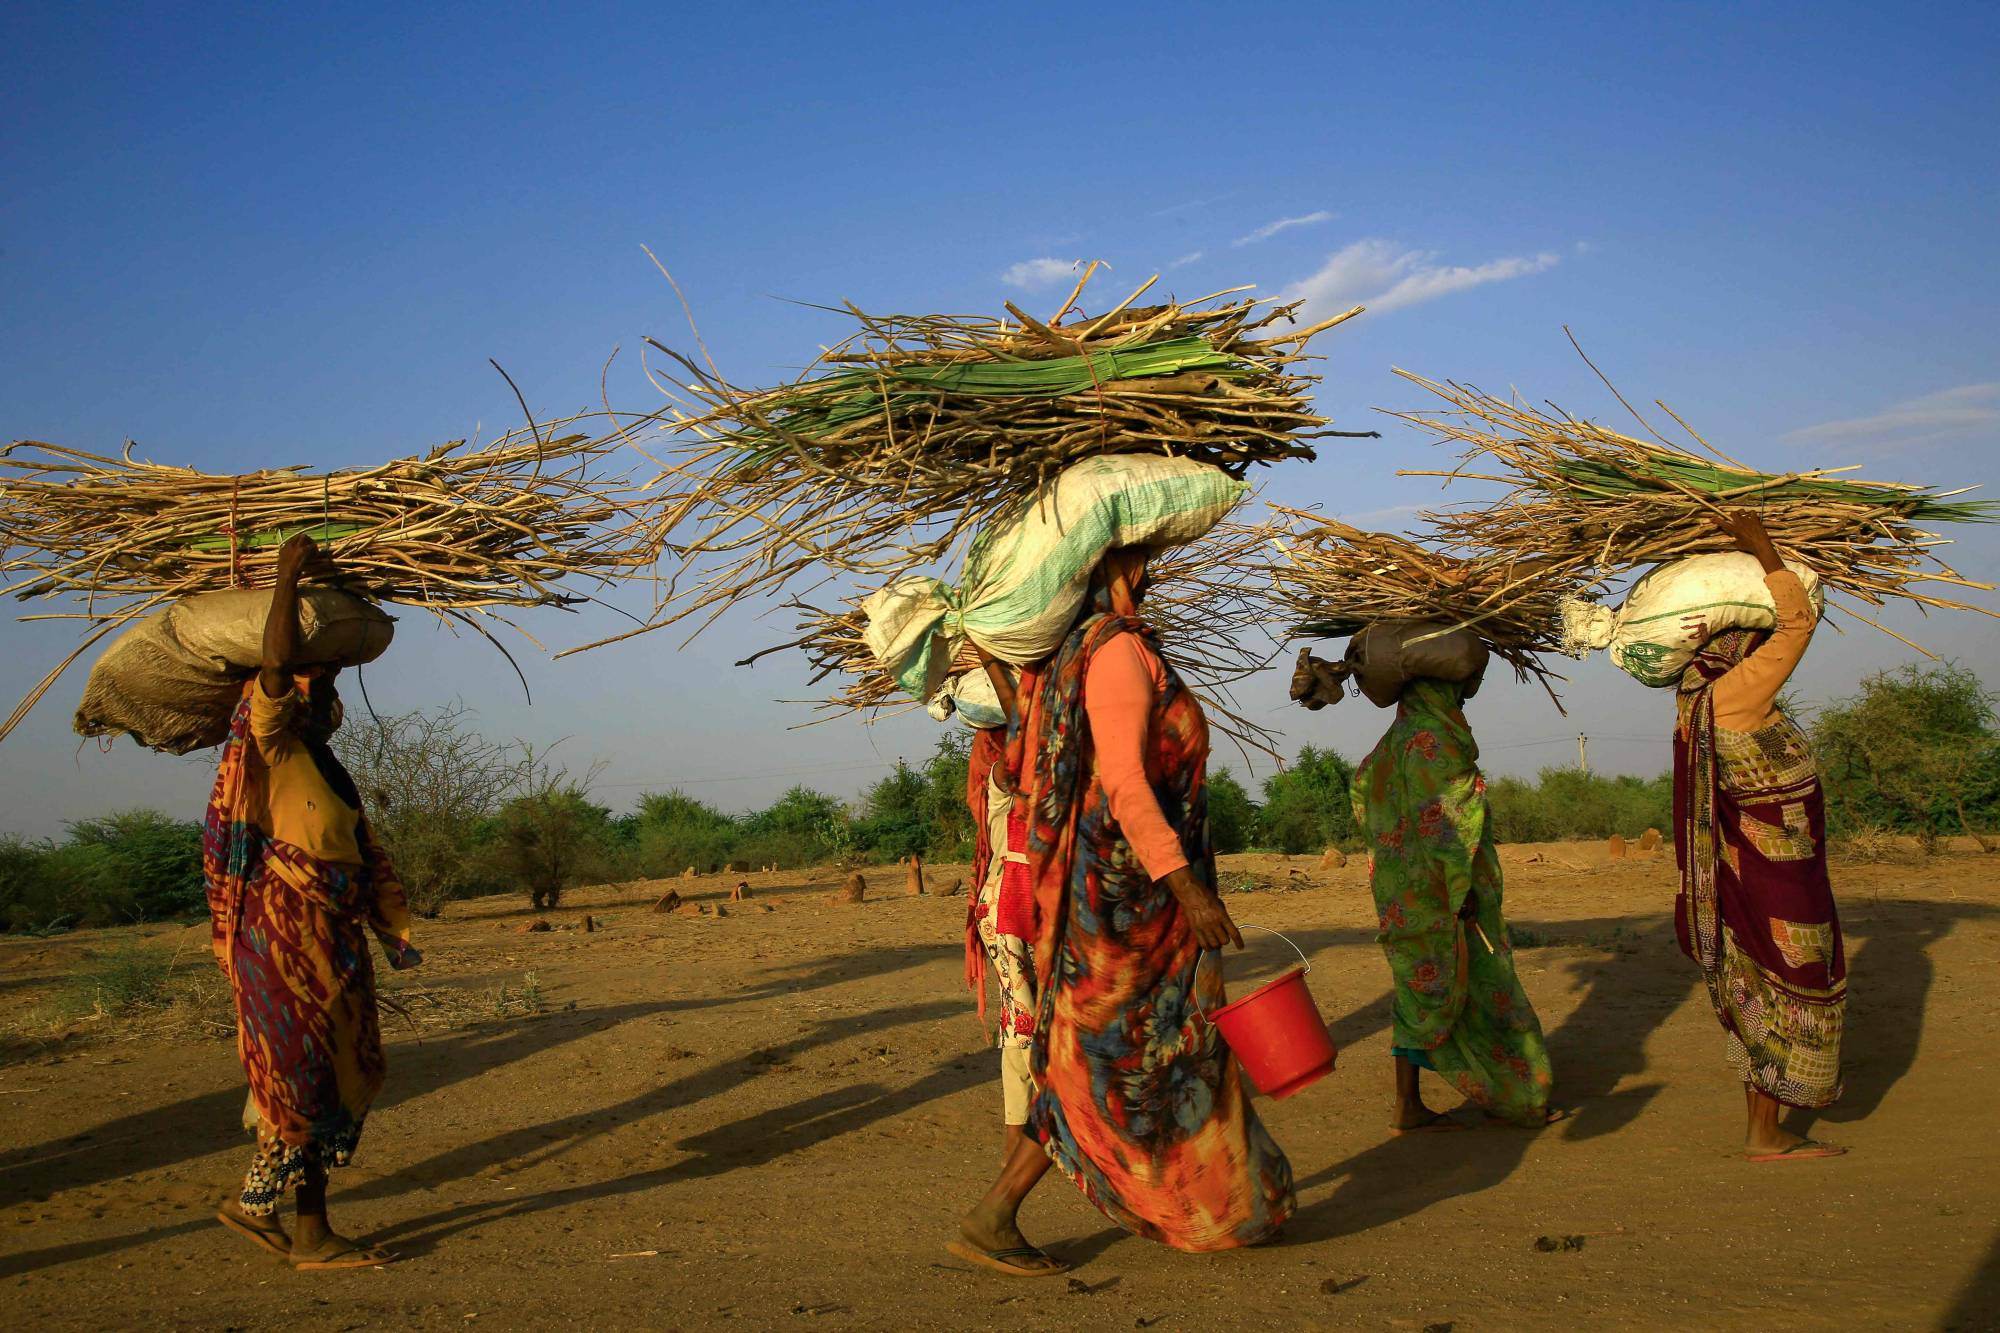 Women carry reed stalks as they walk along the Nile River, near the Sixth Cataract known in Sudan on Oct. 22. | AFP-JIJI